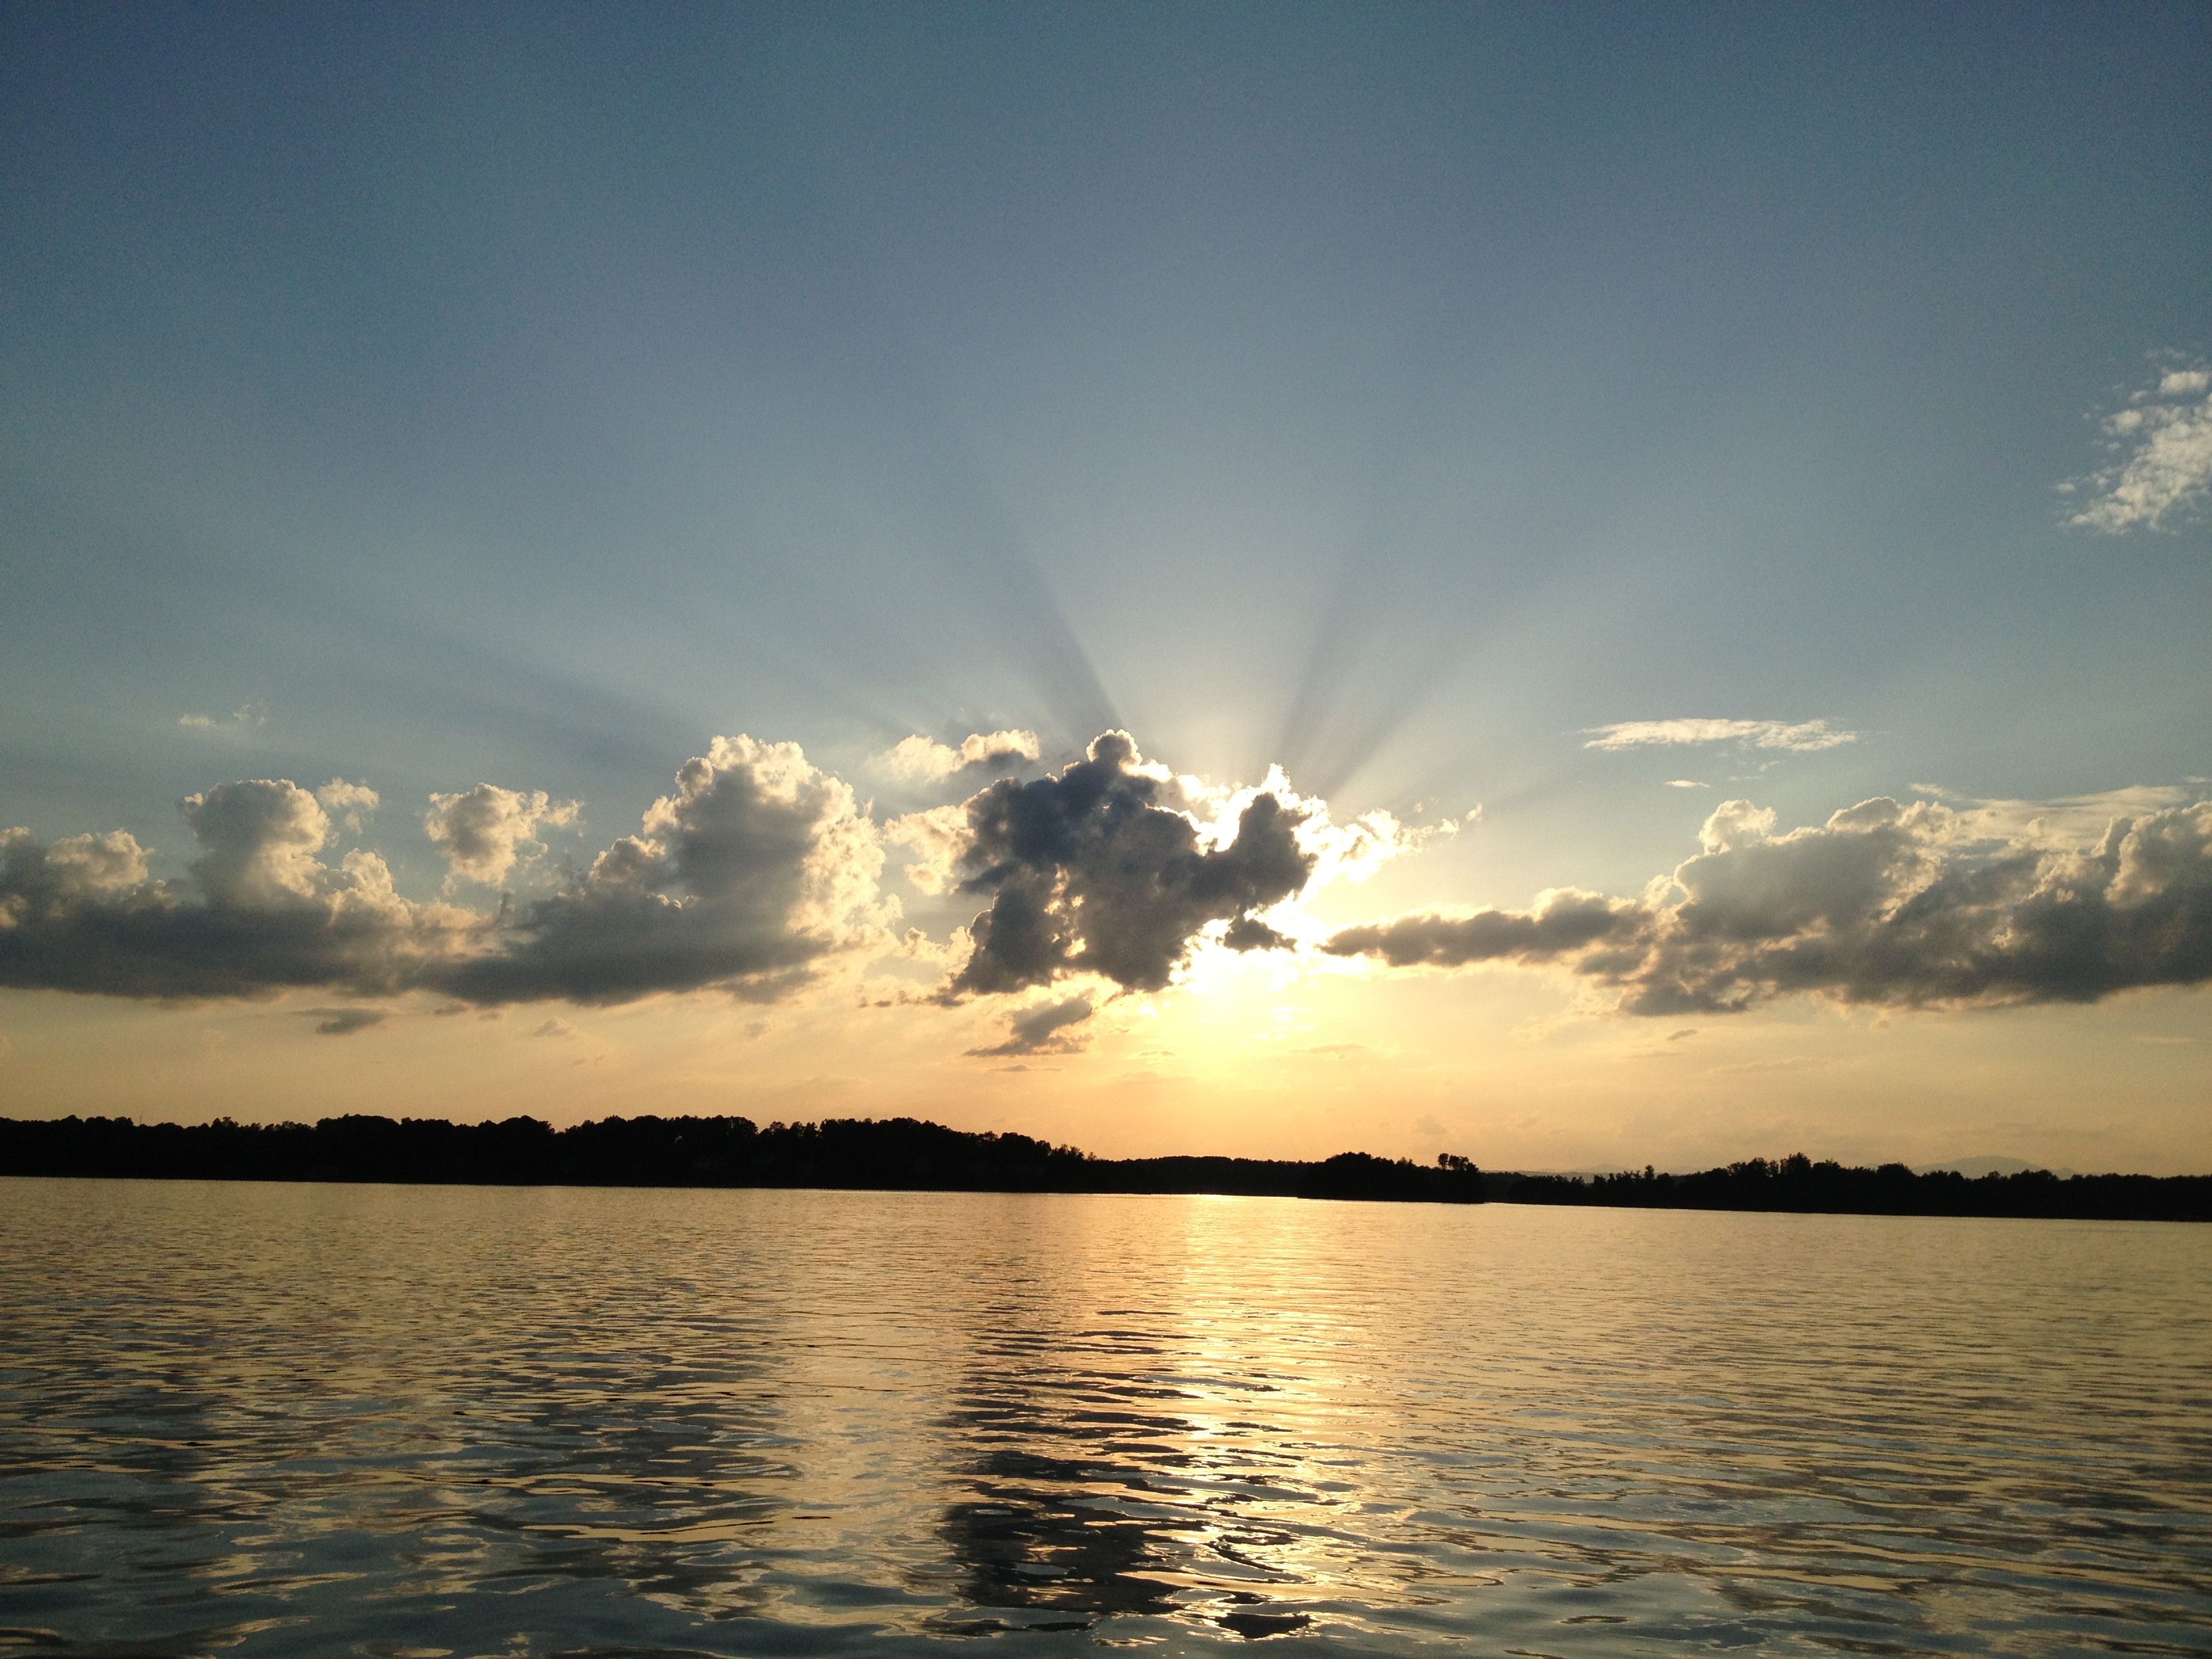 Lake Keowee Sunset View | What I do | Pinterest | Lakes, Sunset and ...